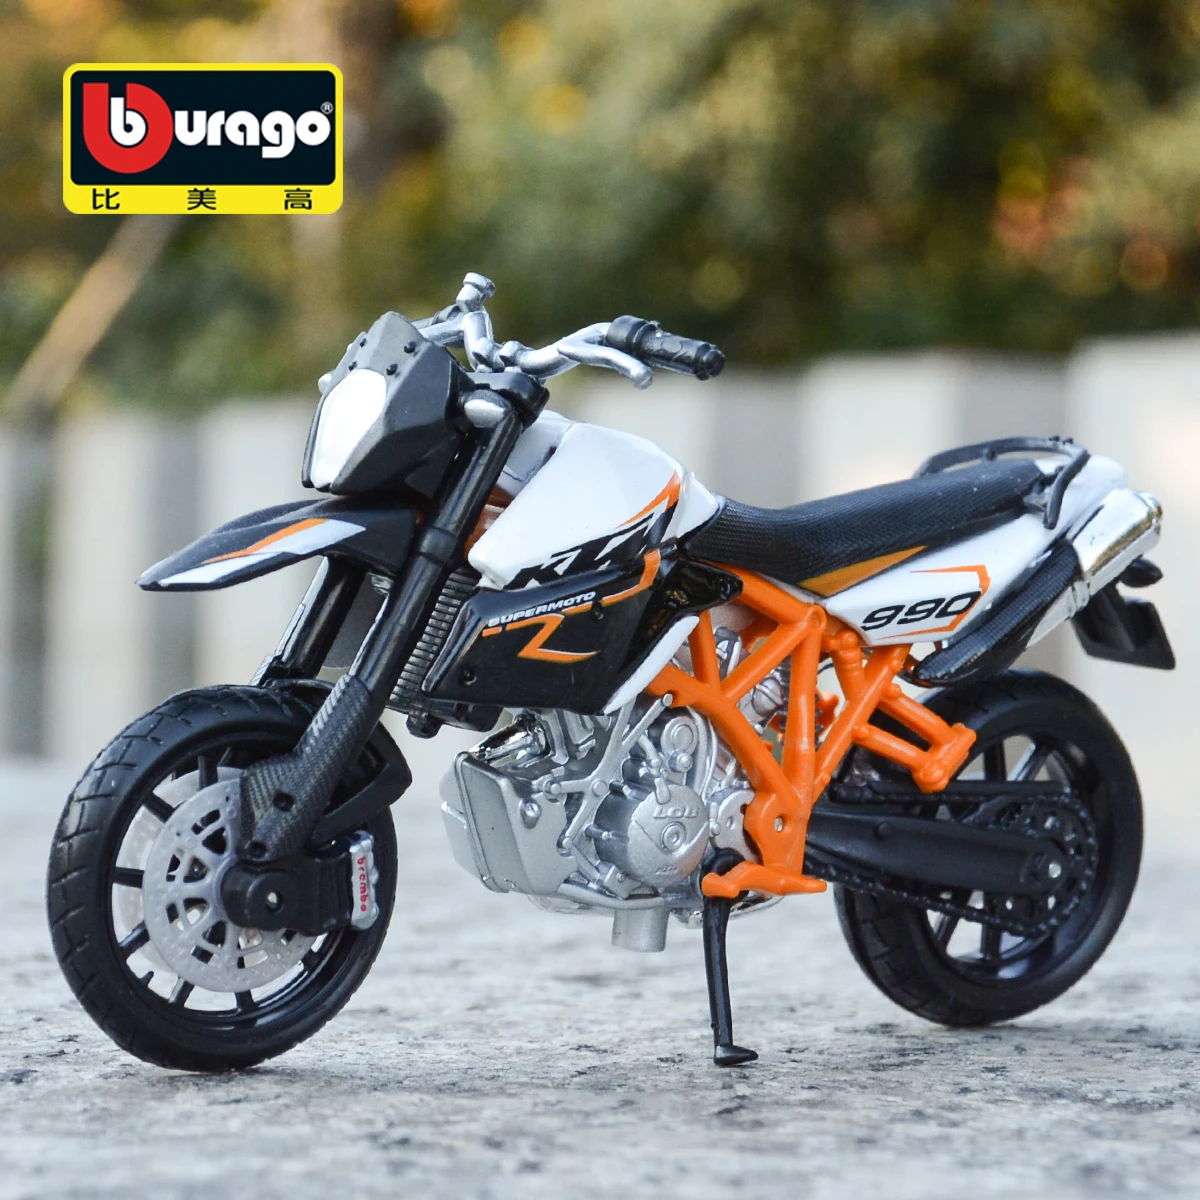 Bburago 1:18 KTM 990 Supermoto R Static Die Cast Vehicles Collectible Motorcycle Model Toys maisto 1 18 honda cbr600f4i static die cast vehicles collectible hobbies motorcycle model toys